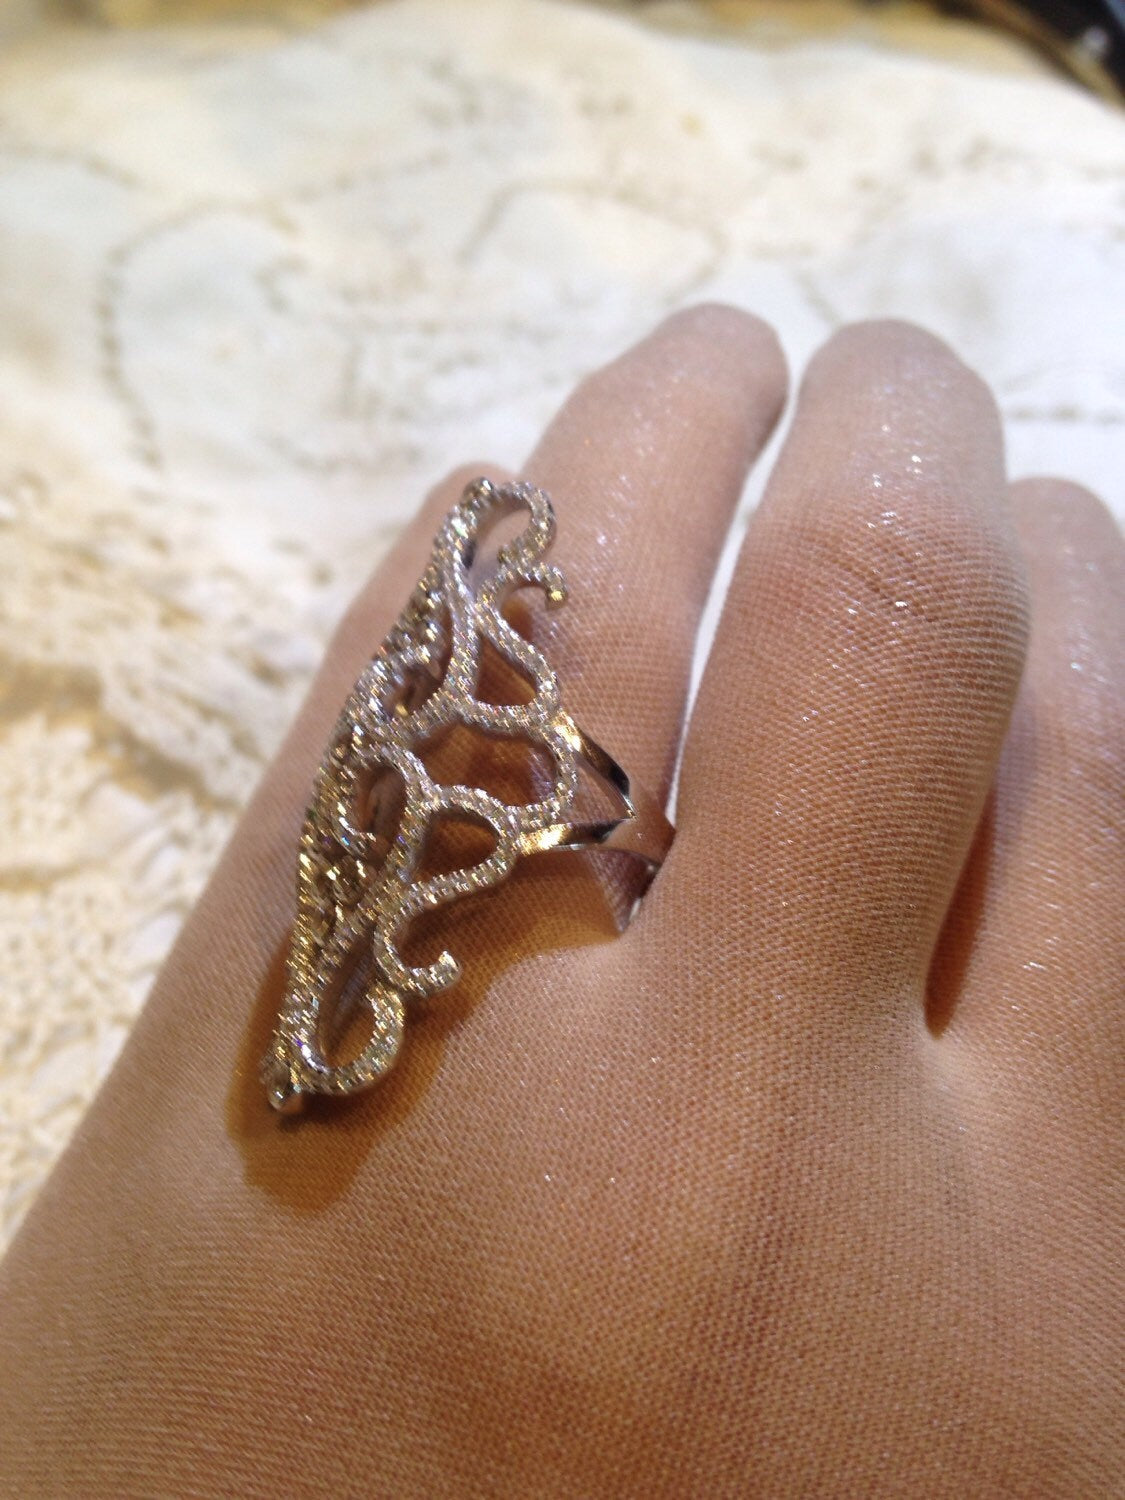 Vintage Filigree Cubic Zirconia Crystal Gothic Sterling Silver Ring